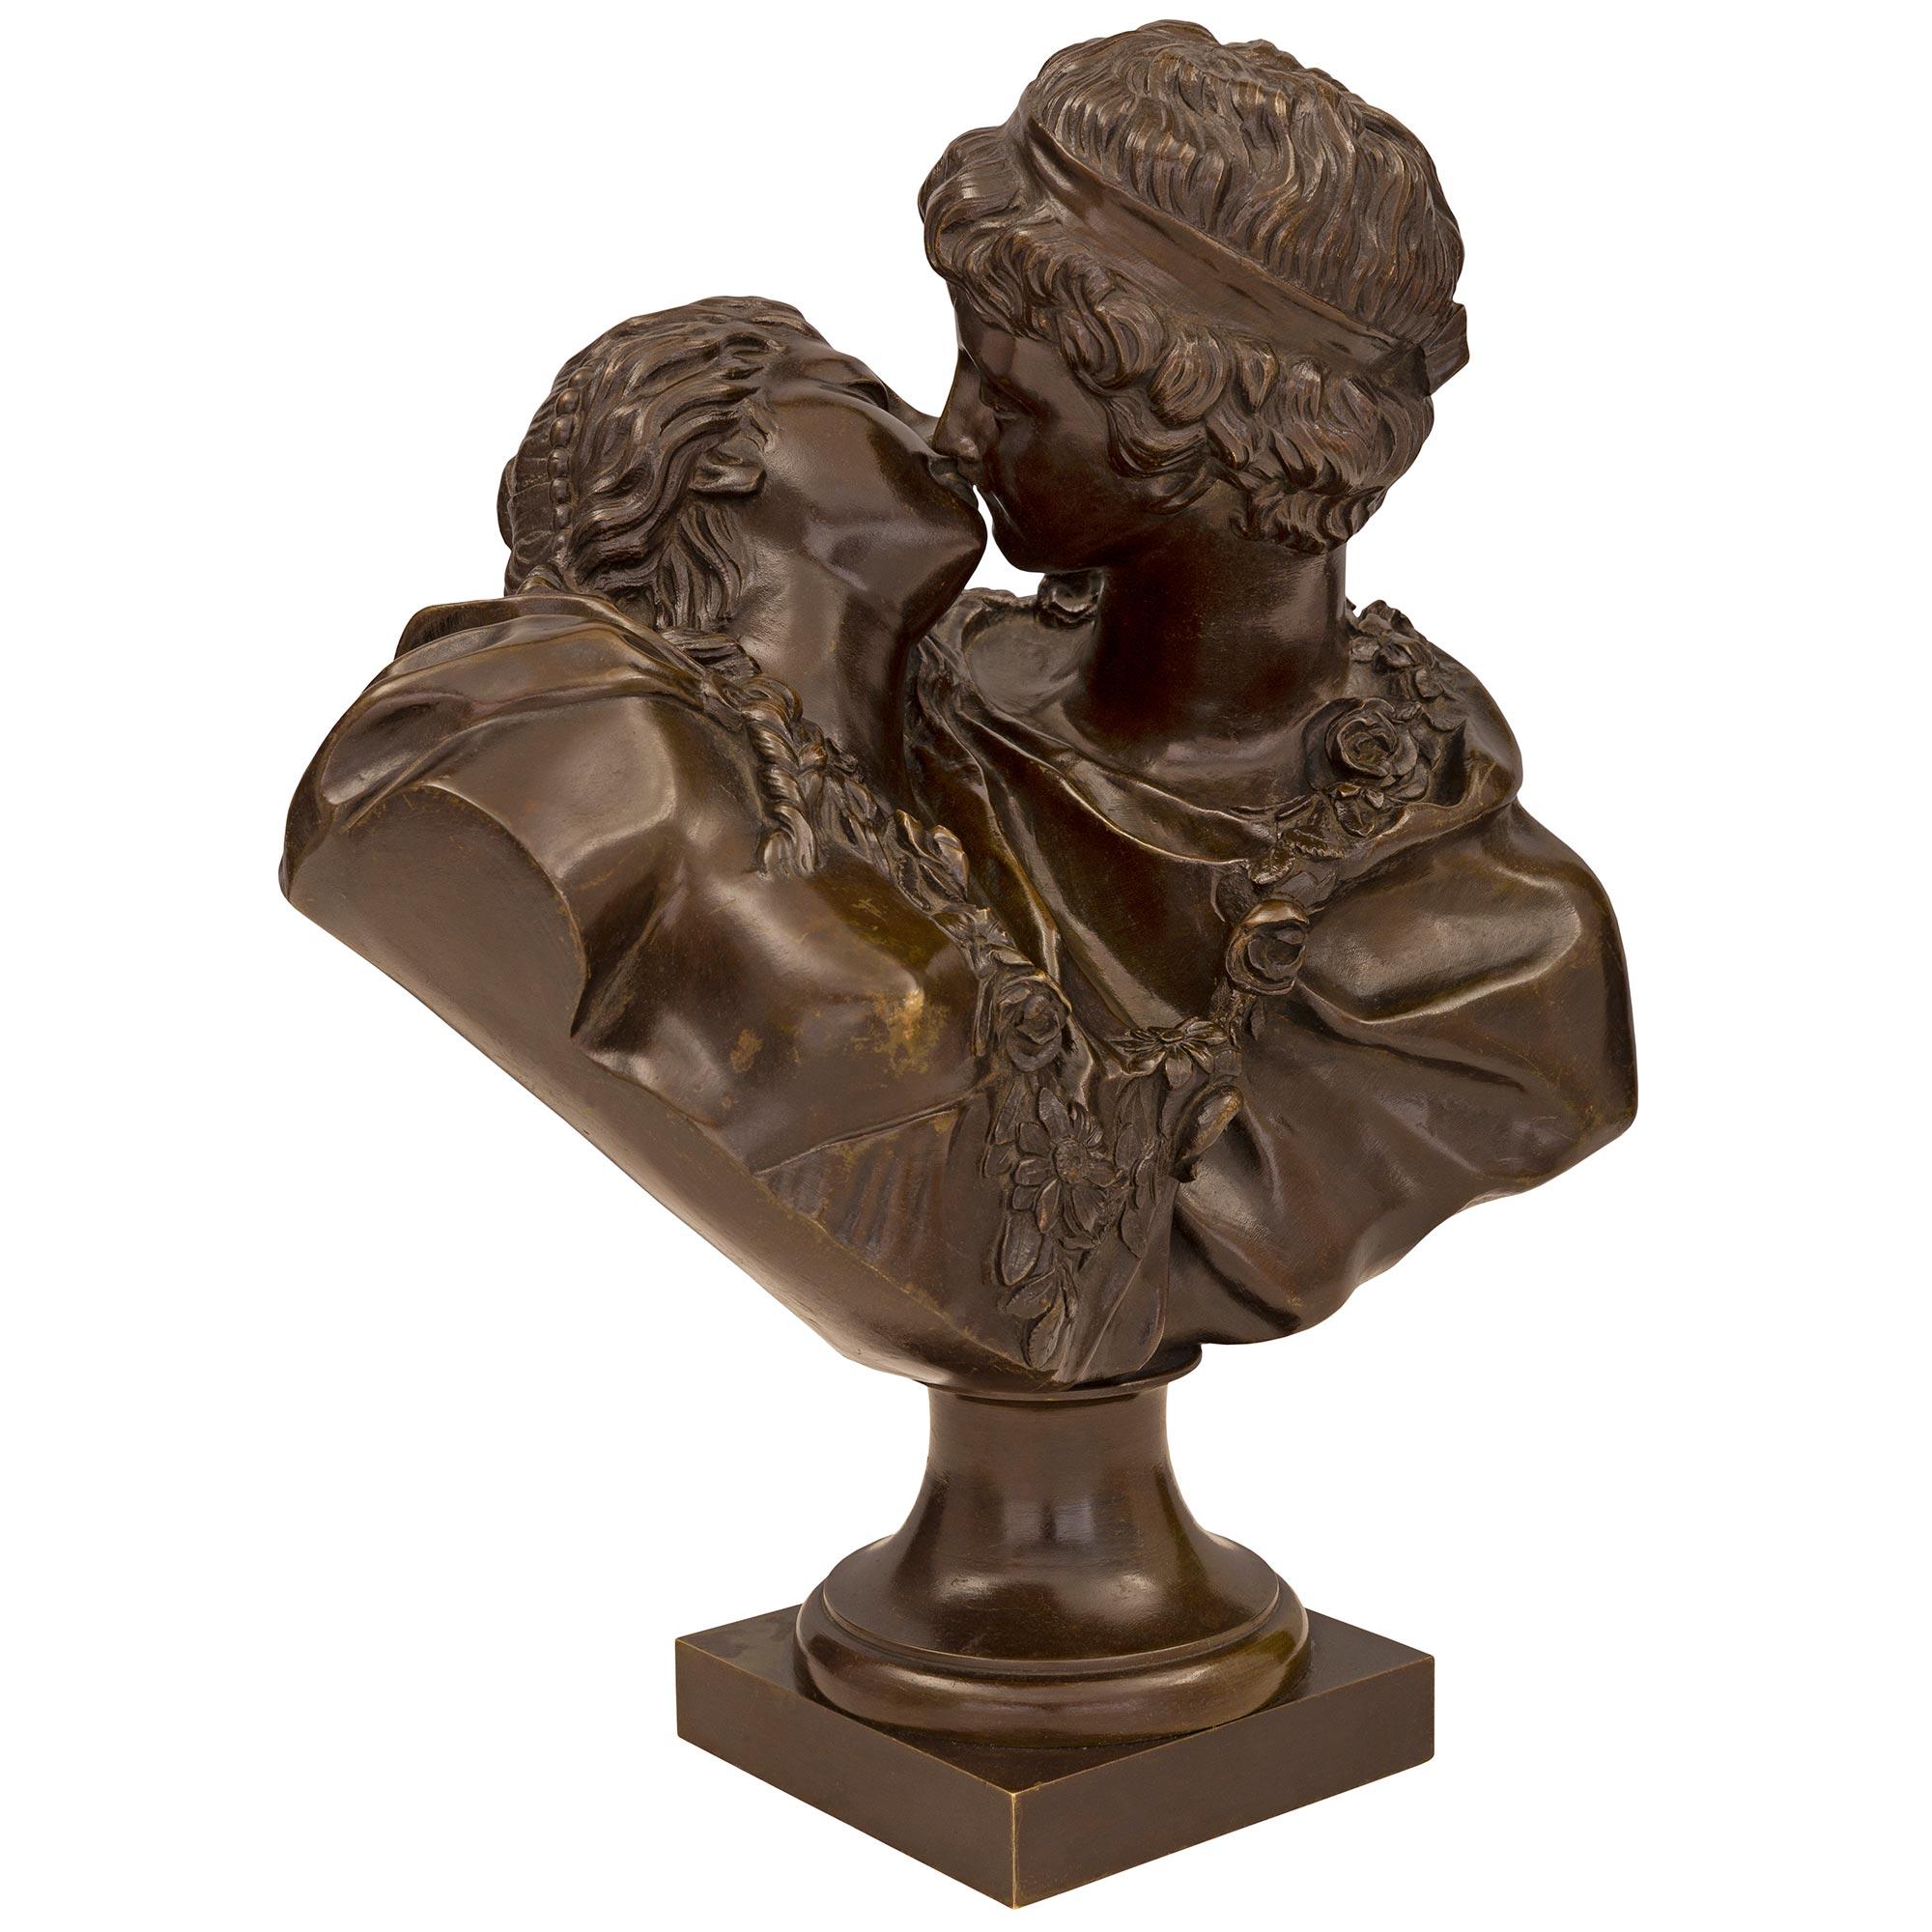 A charming and extremely high quality French 19th century patinated bronze statue of Le Baiser Donné, signed by Houdon. The statue is raised by a square base below the socle shaped pedestal. Above, the superb and most romantic patinated bronze bust